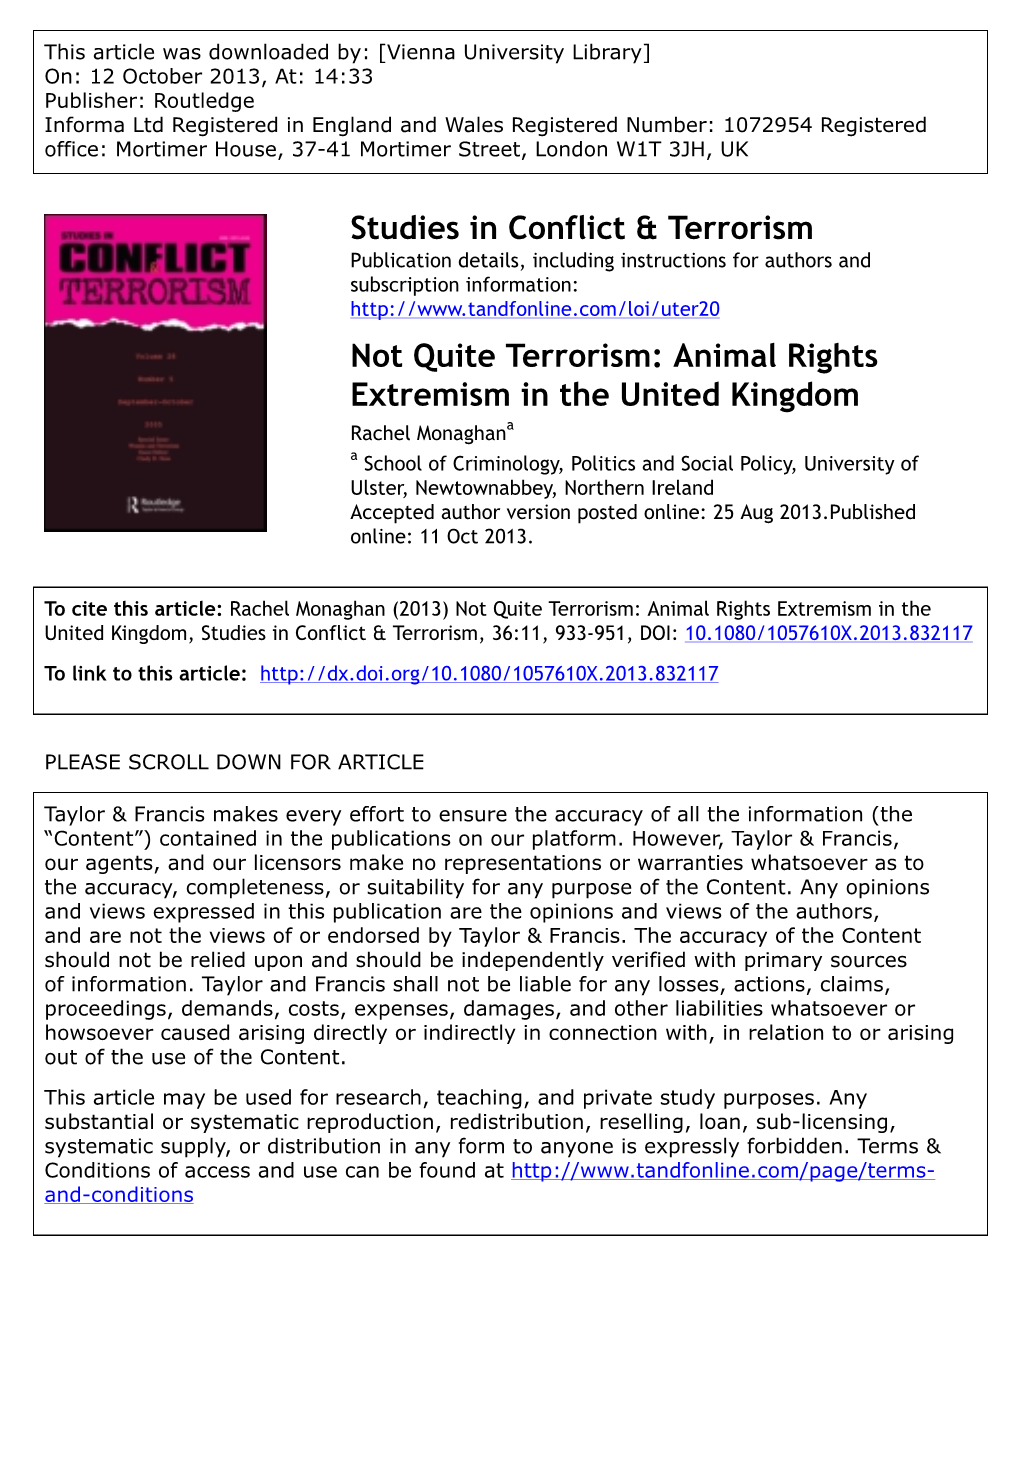 Not Quite Terrorism. Animal Rights Extremism in the United Kingdom